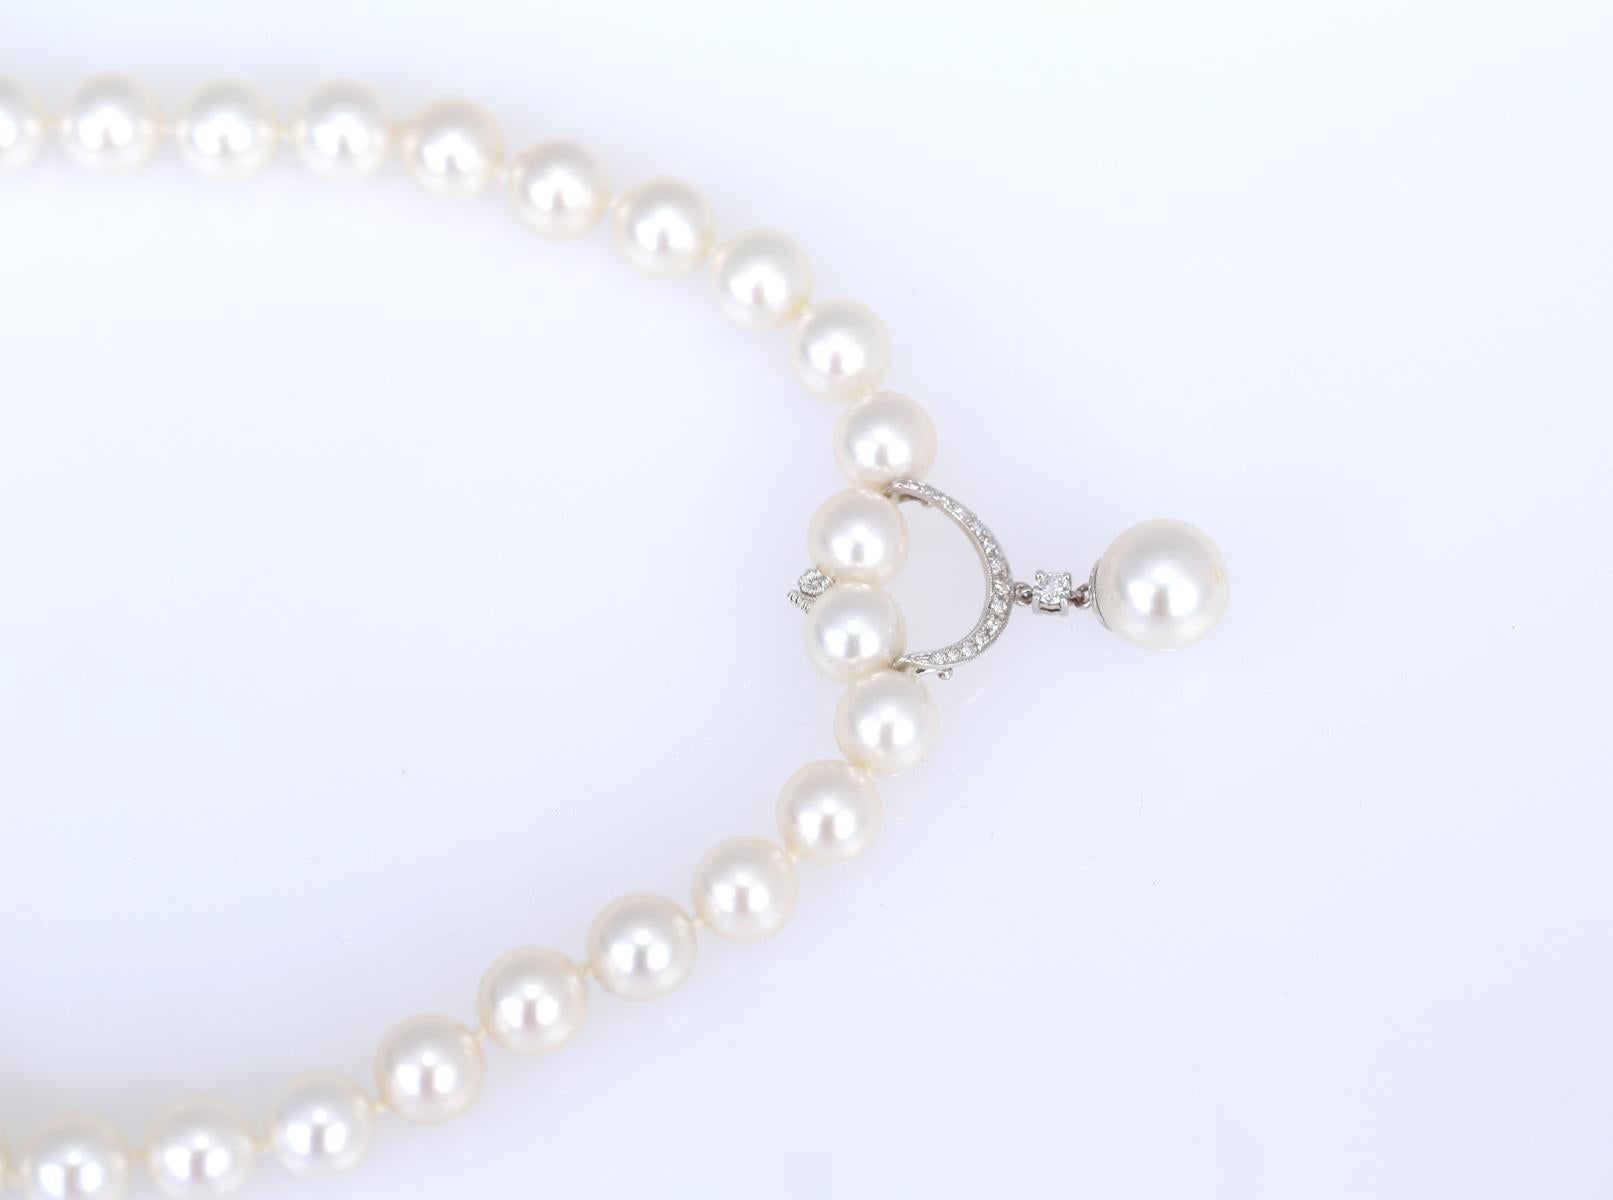 Pearls Diamonds 2.5 Carat Necklace AAA Quality, 2020 For Sale 1